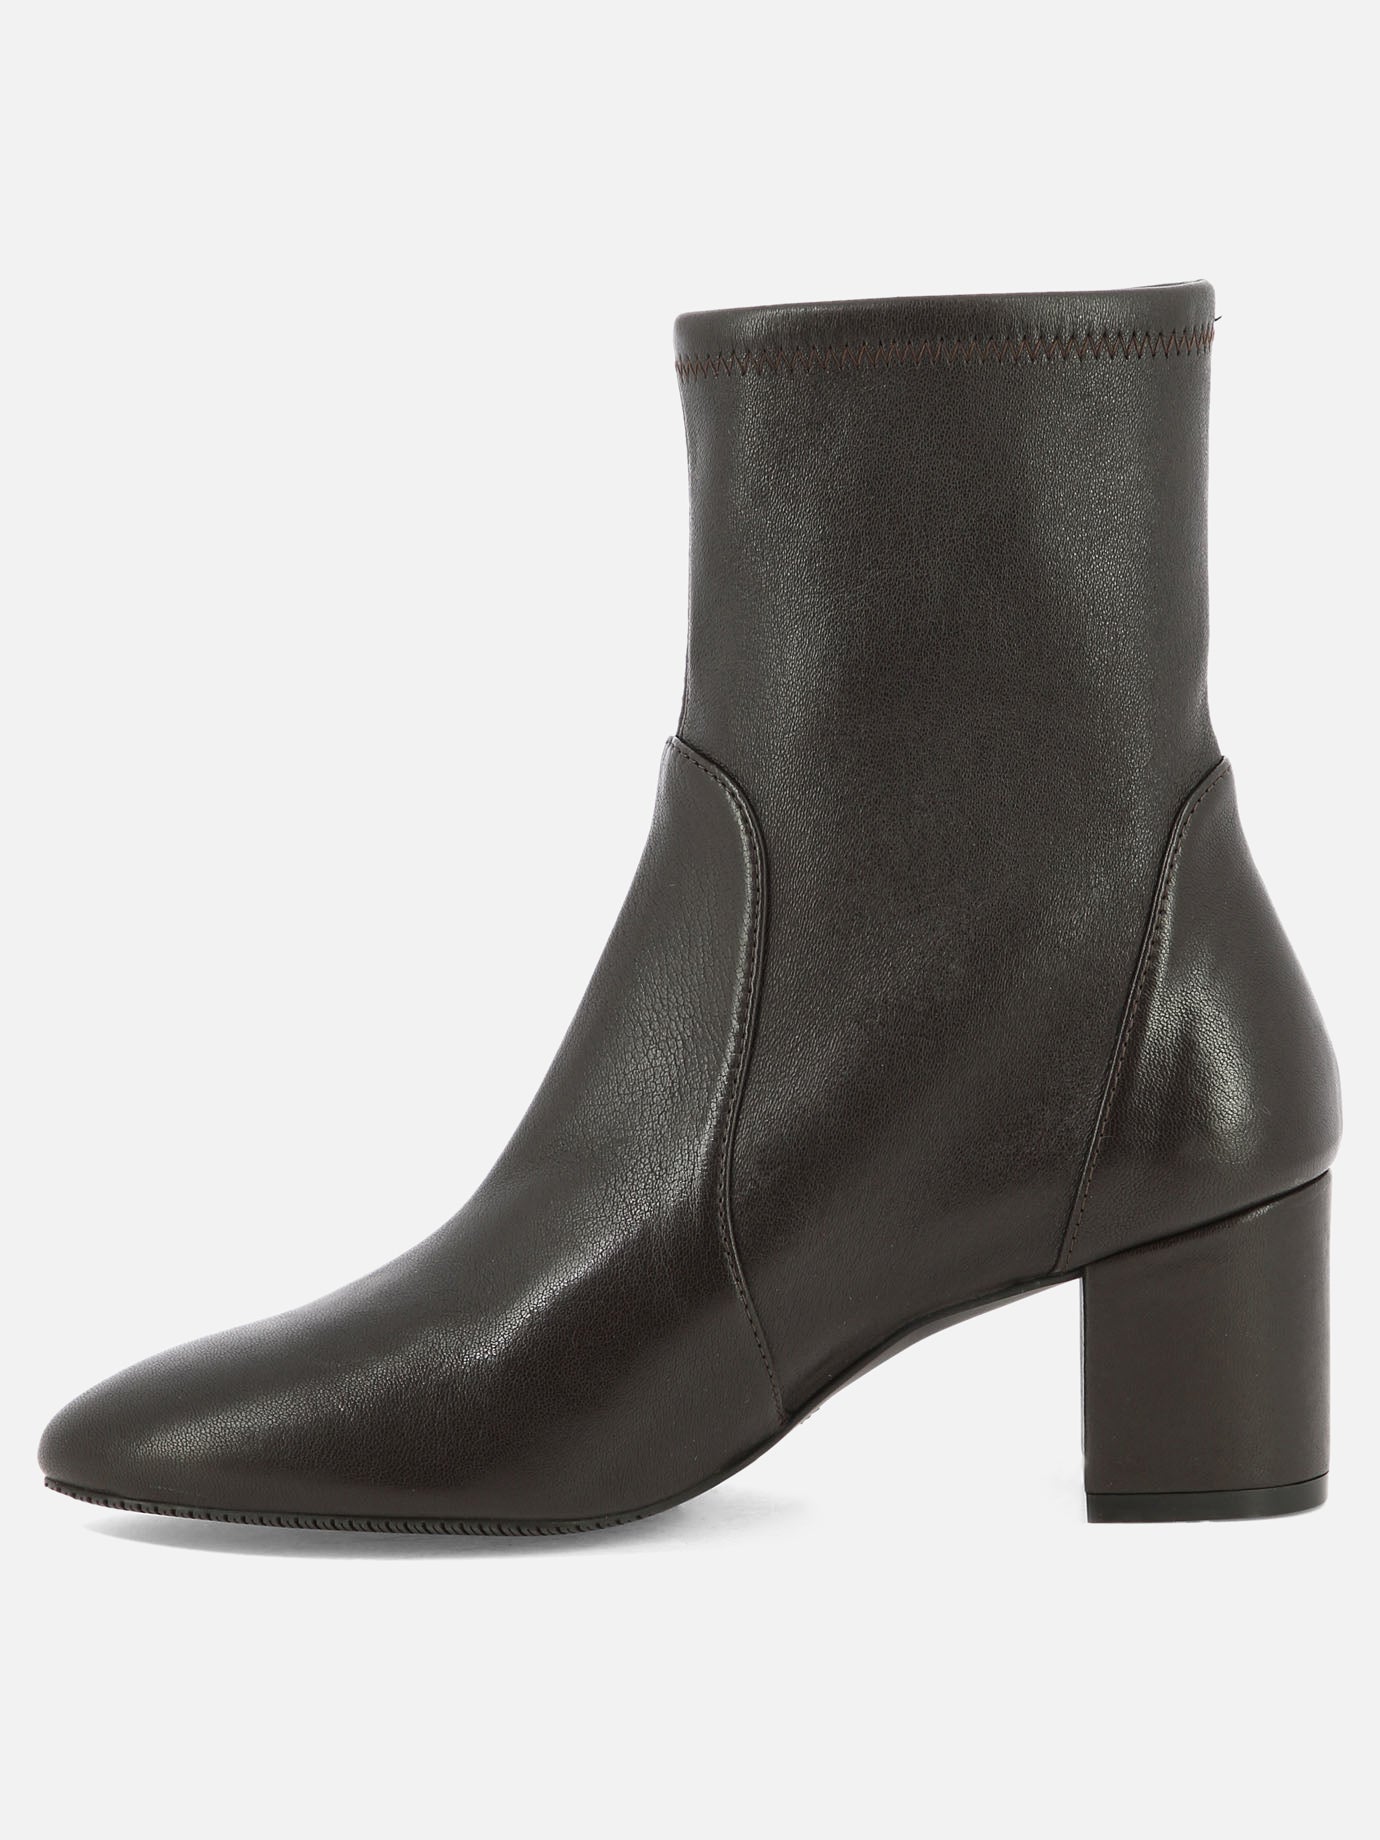 "Yuliana 60" ankle boots